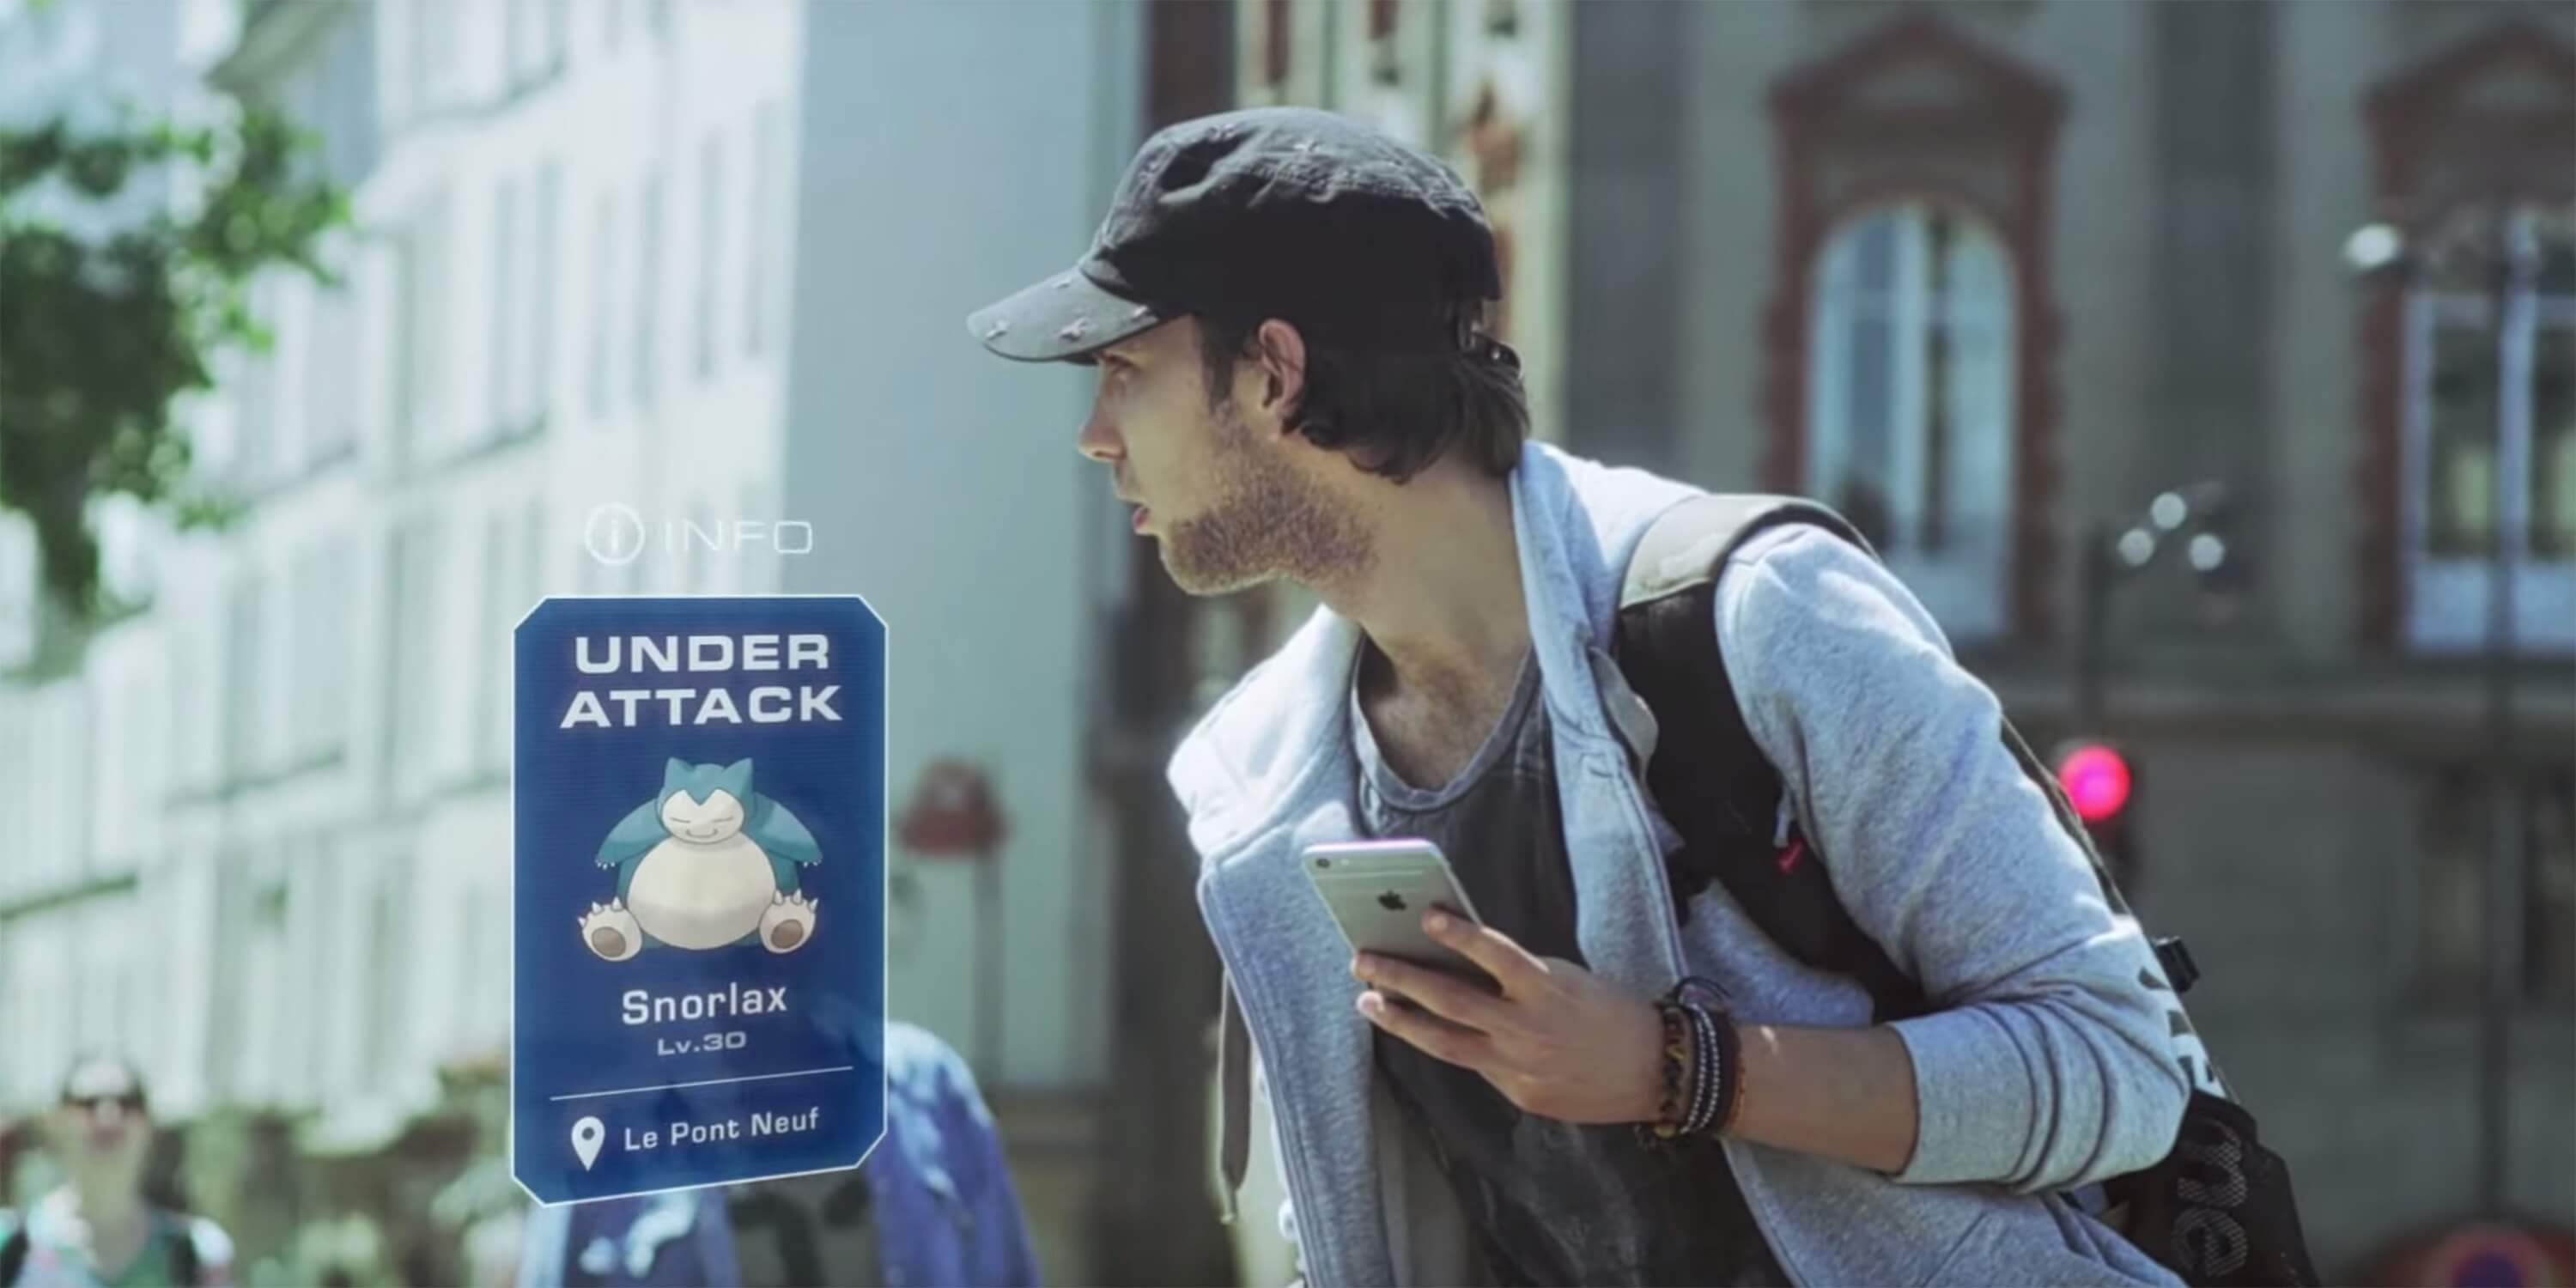 An Introduction to the Pokémon GO Gaming Craze & how it can benefit your Business